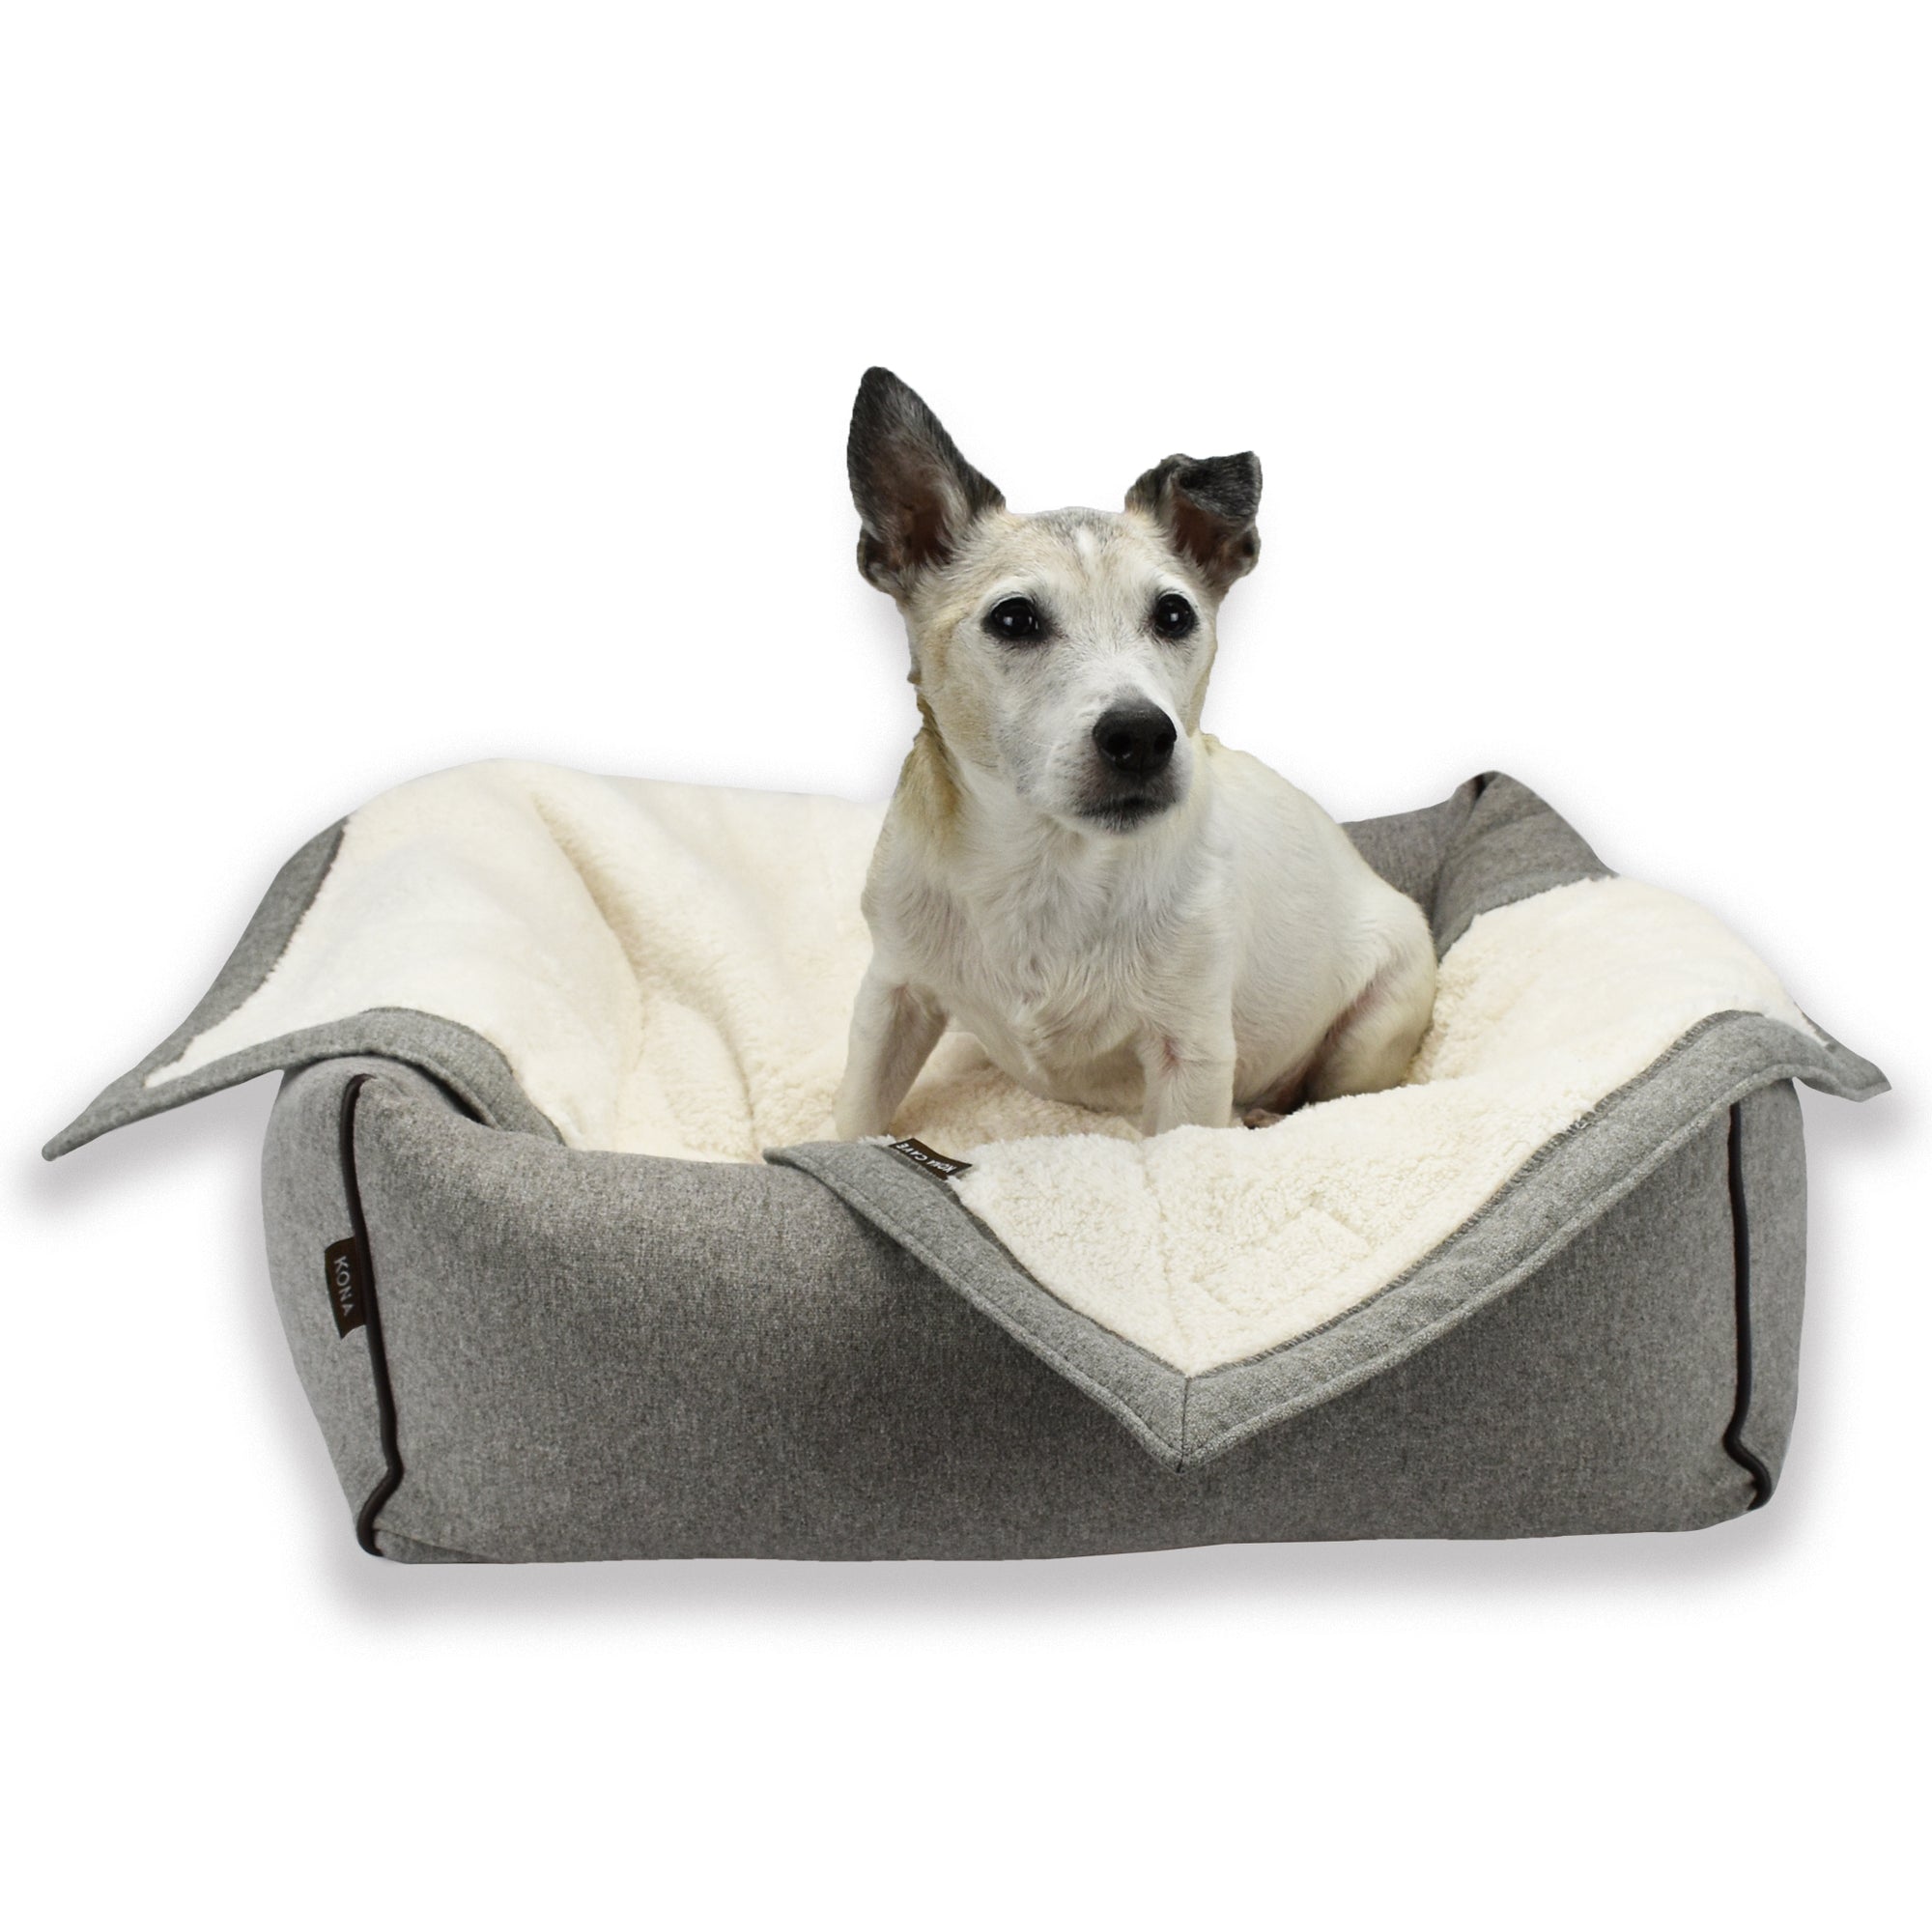 Kona the Jack Russel Terrier models the KONA CAVE® Grey Flannel Pet Blanket and Bolster Bed in size Small